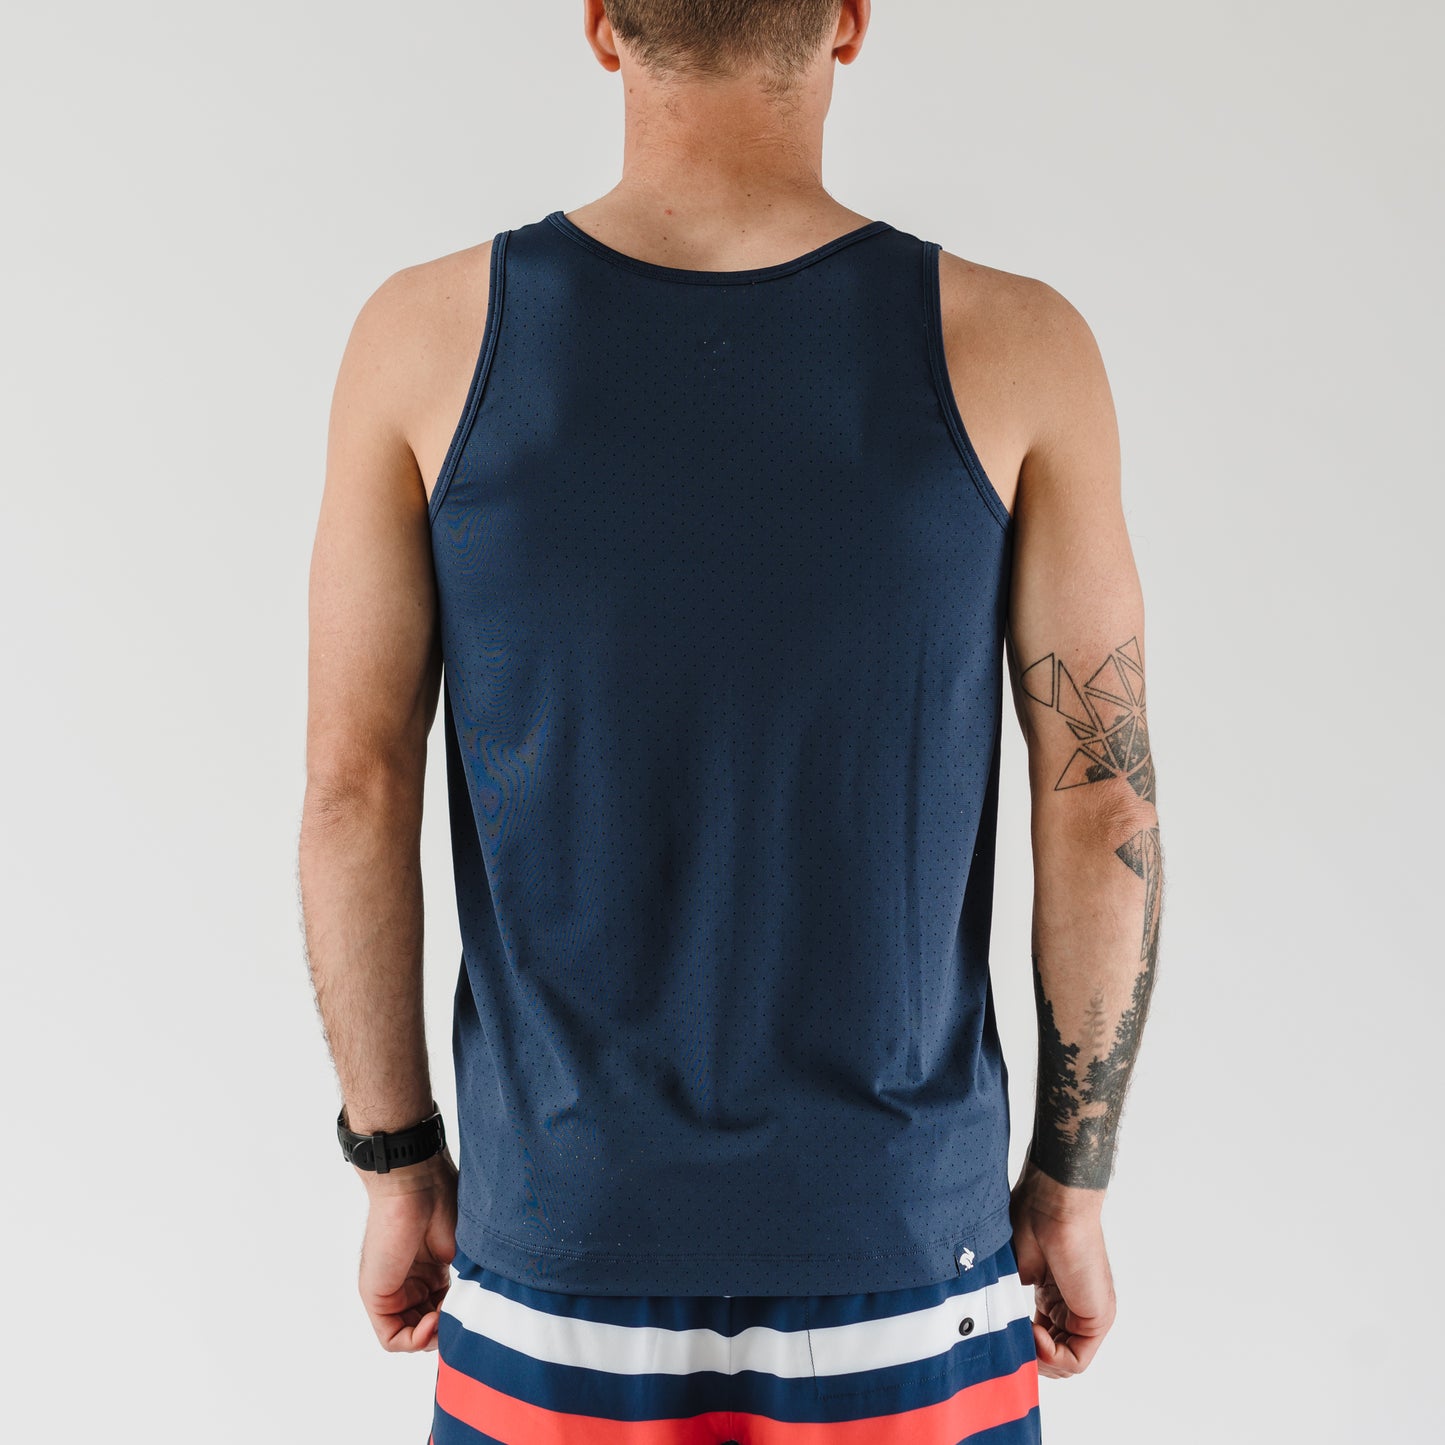 rabbit - Welcome To The Gun Show Perf ICE - Dress Blues - Men's